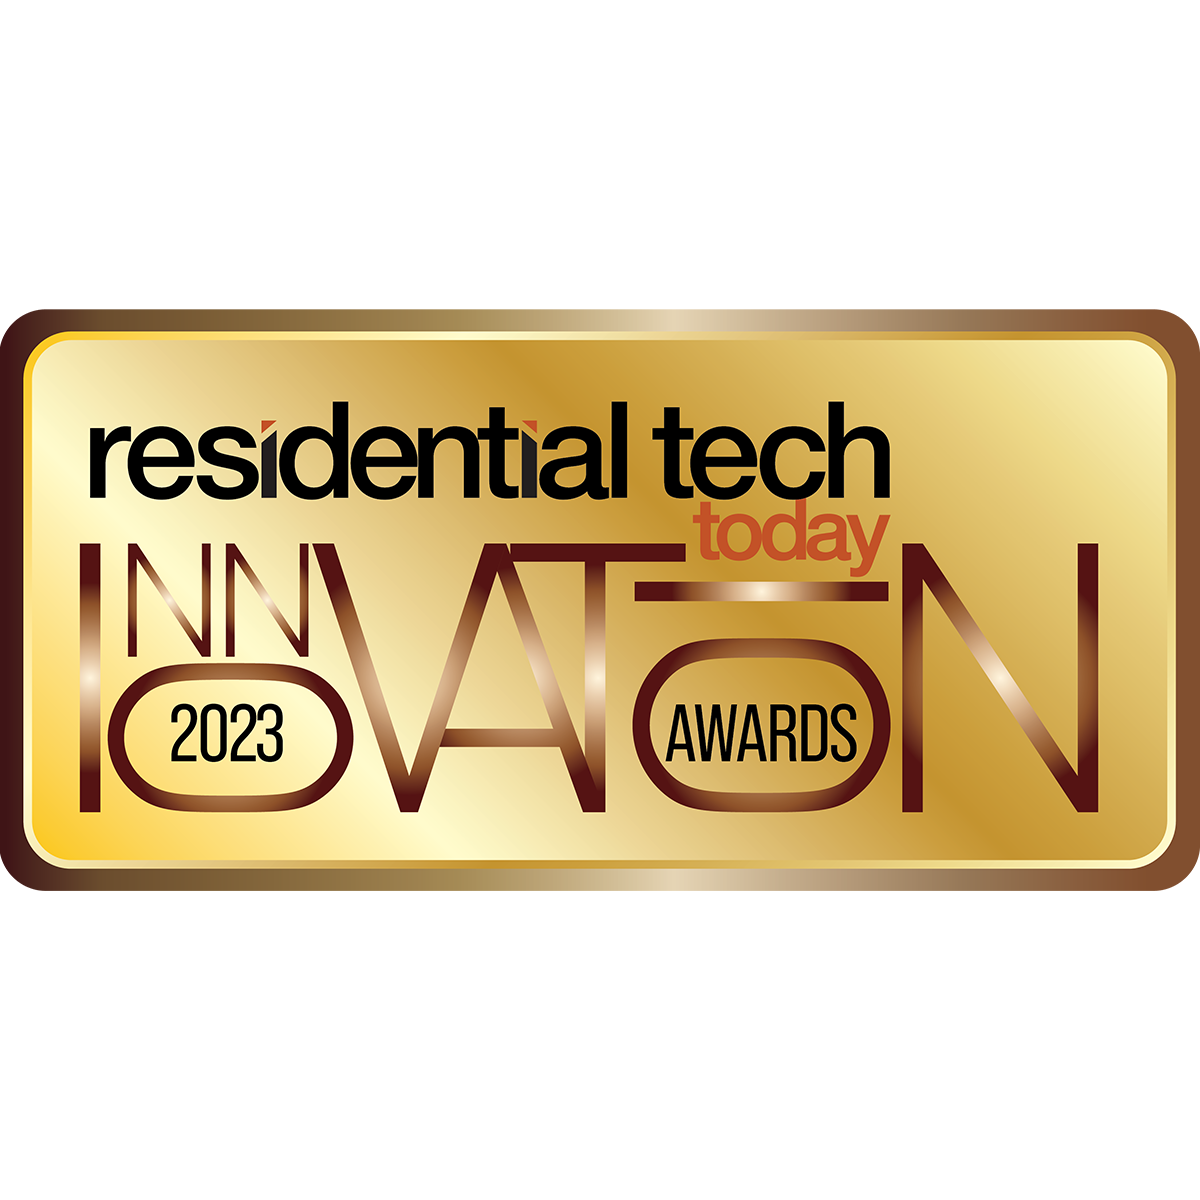 Residential Tech Today Innovation Awards